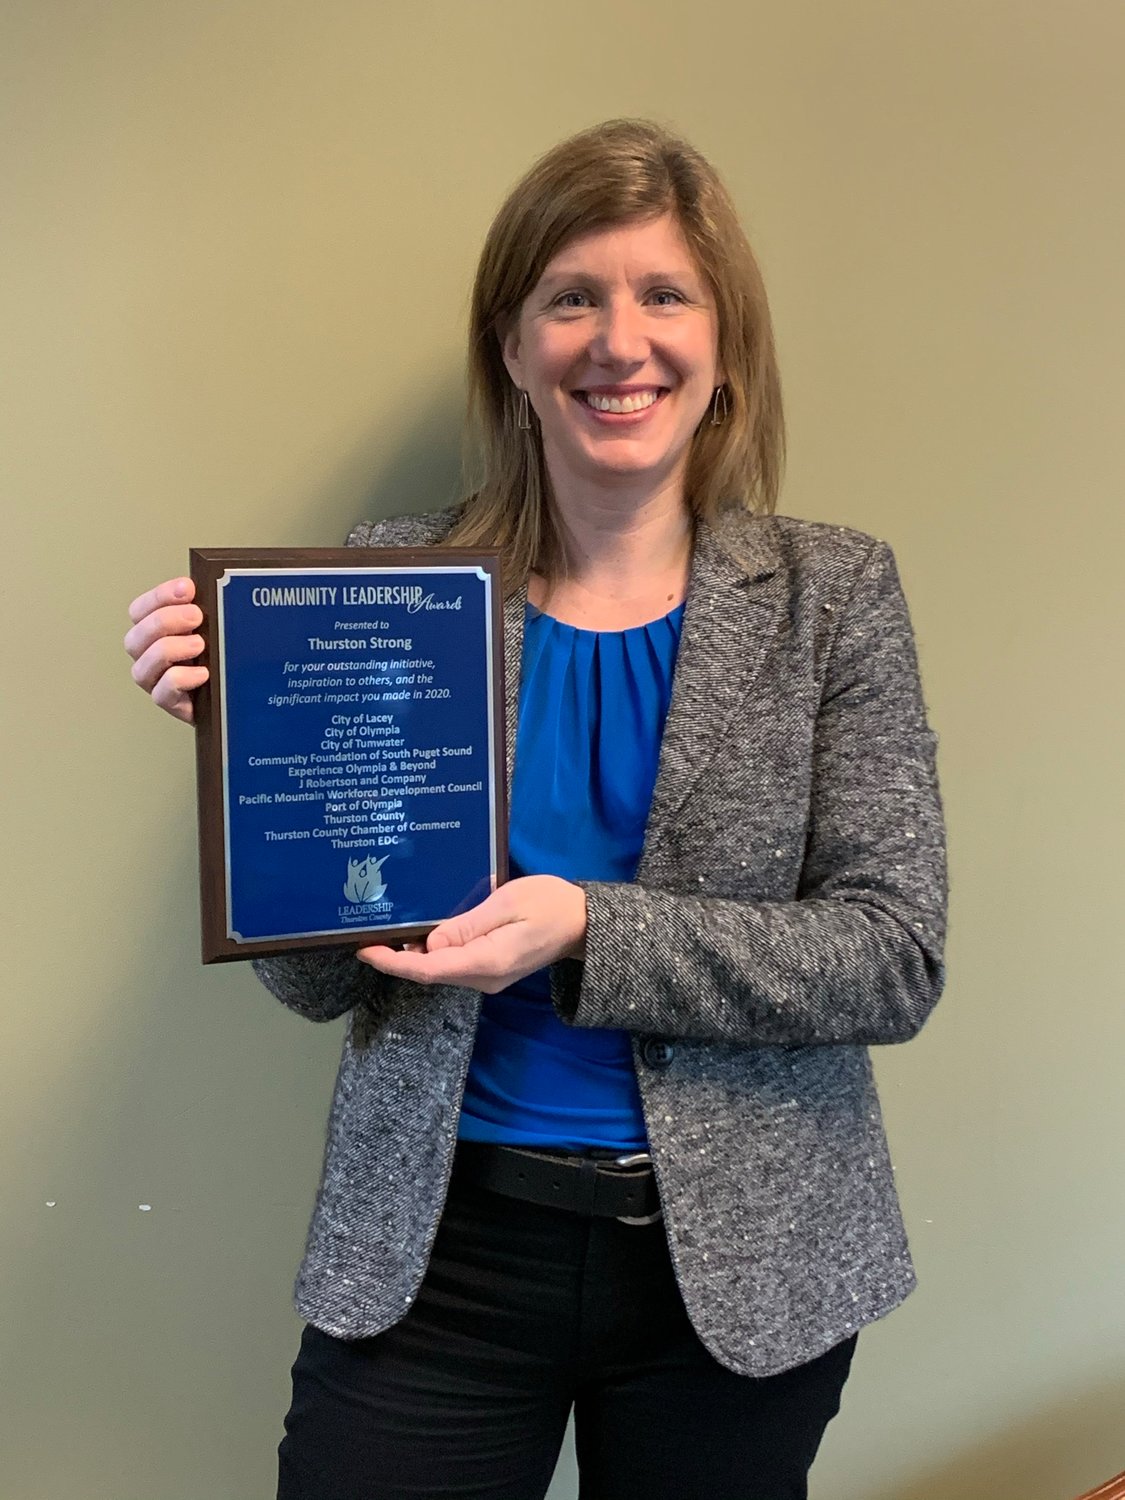 Mindie Reule, President and CEO of the Community Foundation of South Puget Sound, accepts the 2020 Community Leadership Award from Leadership Thurston County (LTC) for the organization's part in the Thurston Strong initiative.